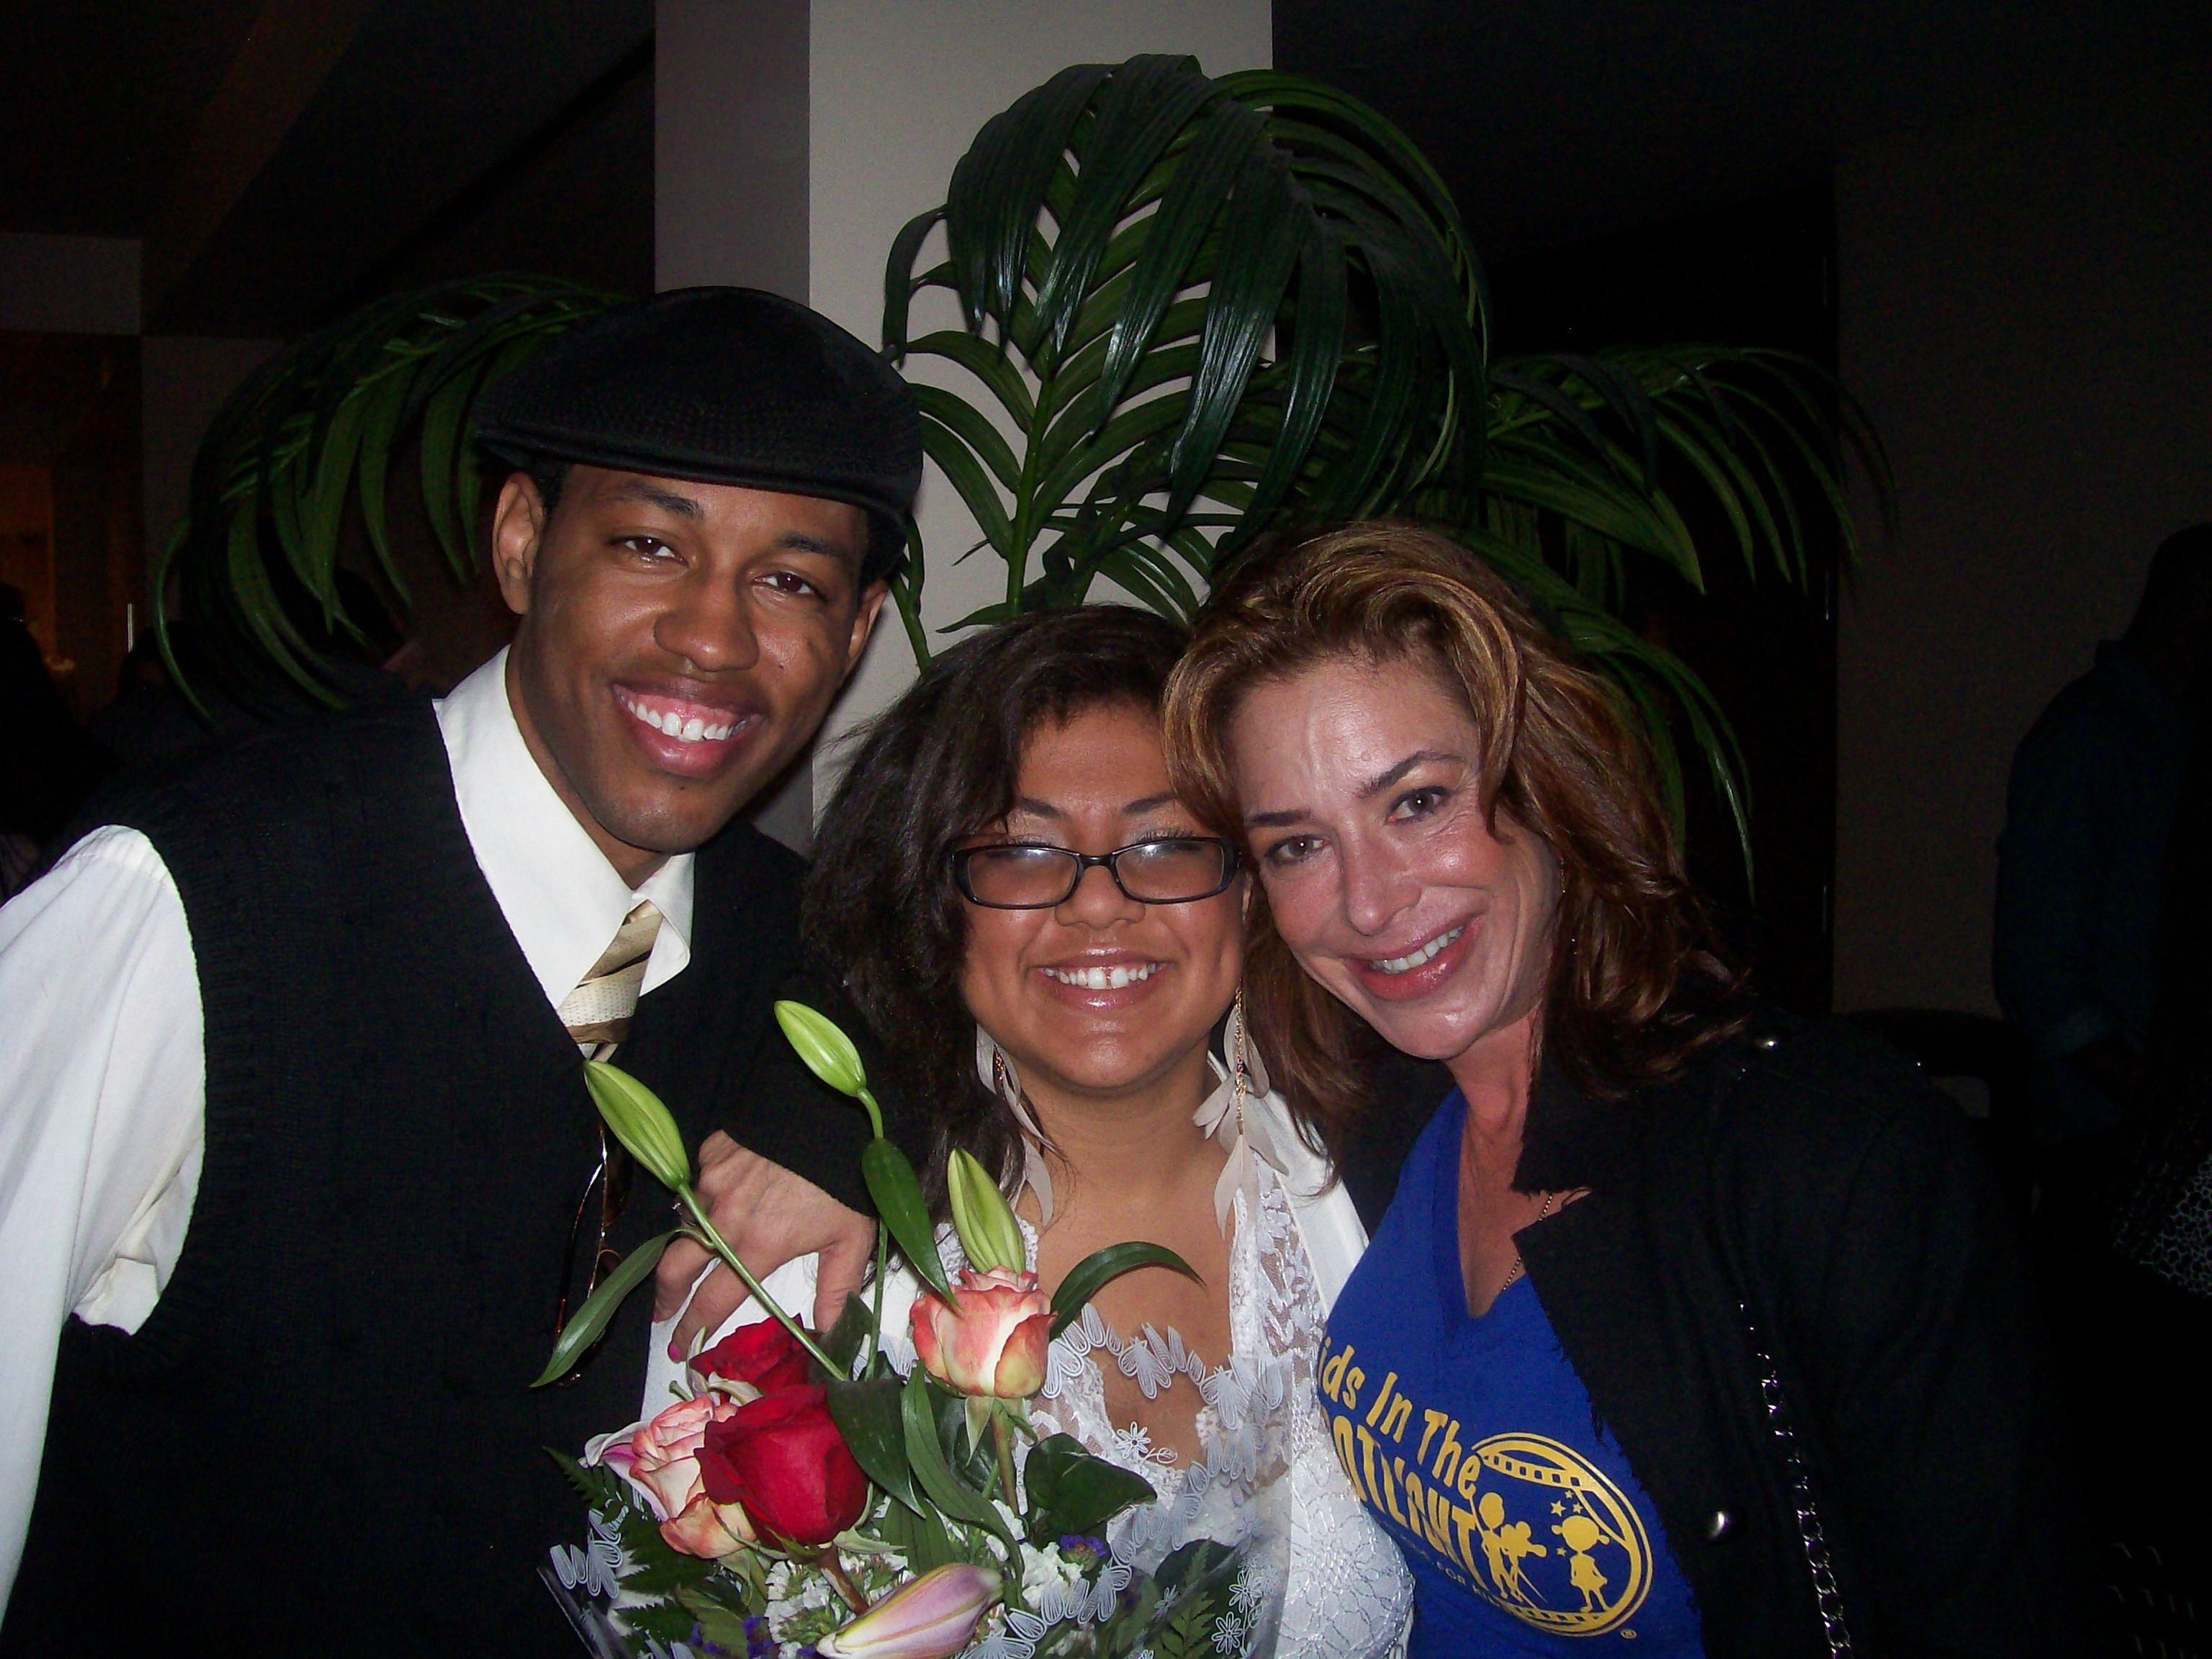 Jesse Mitchell, Yvette Meze, and Claudia Wells at the premiere of 